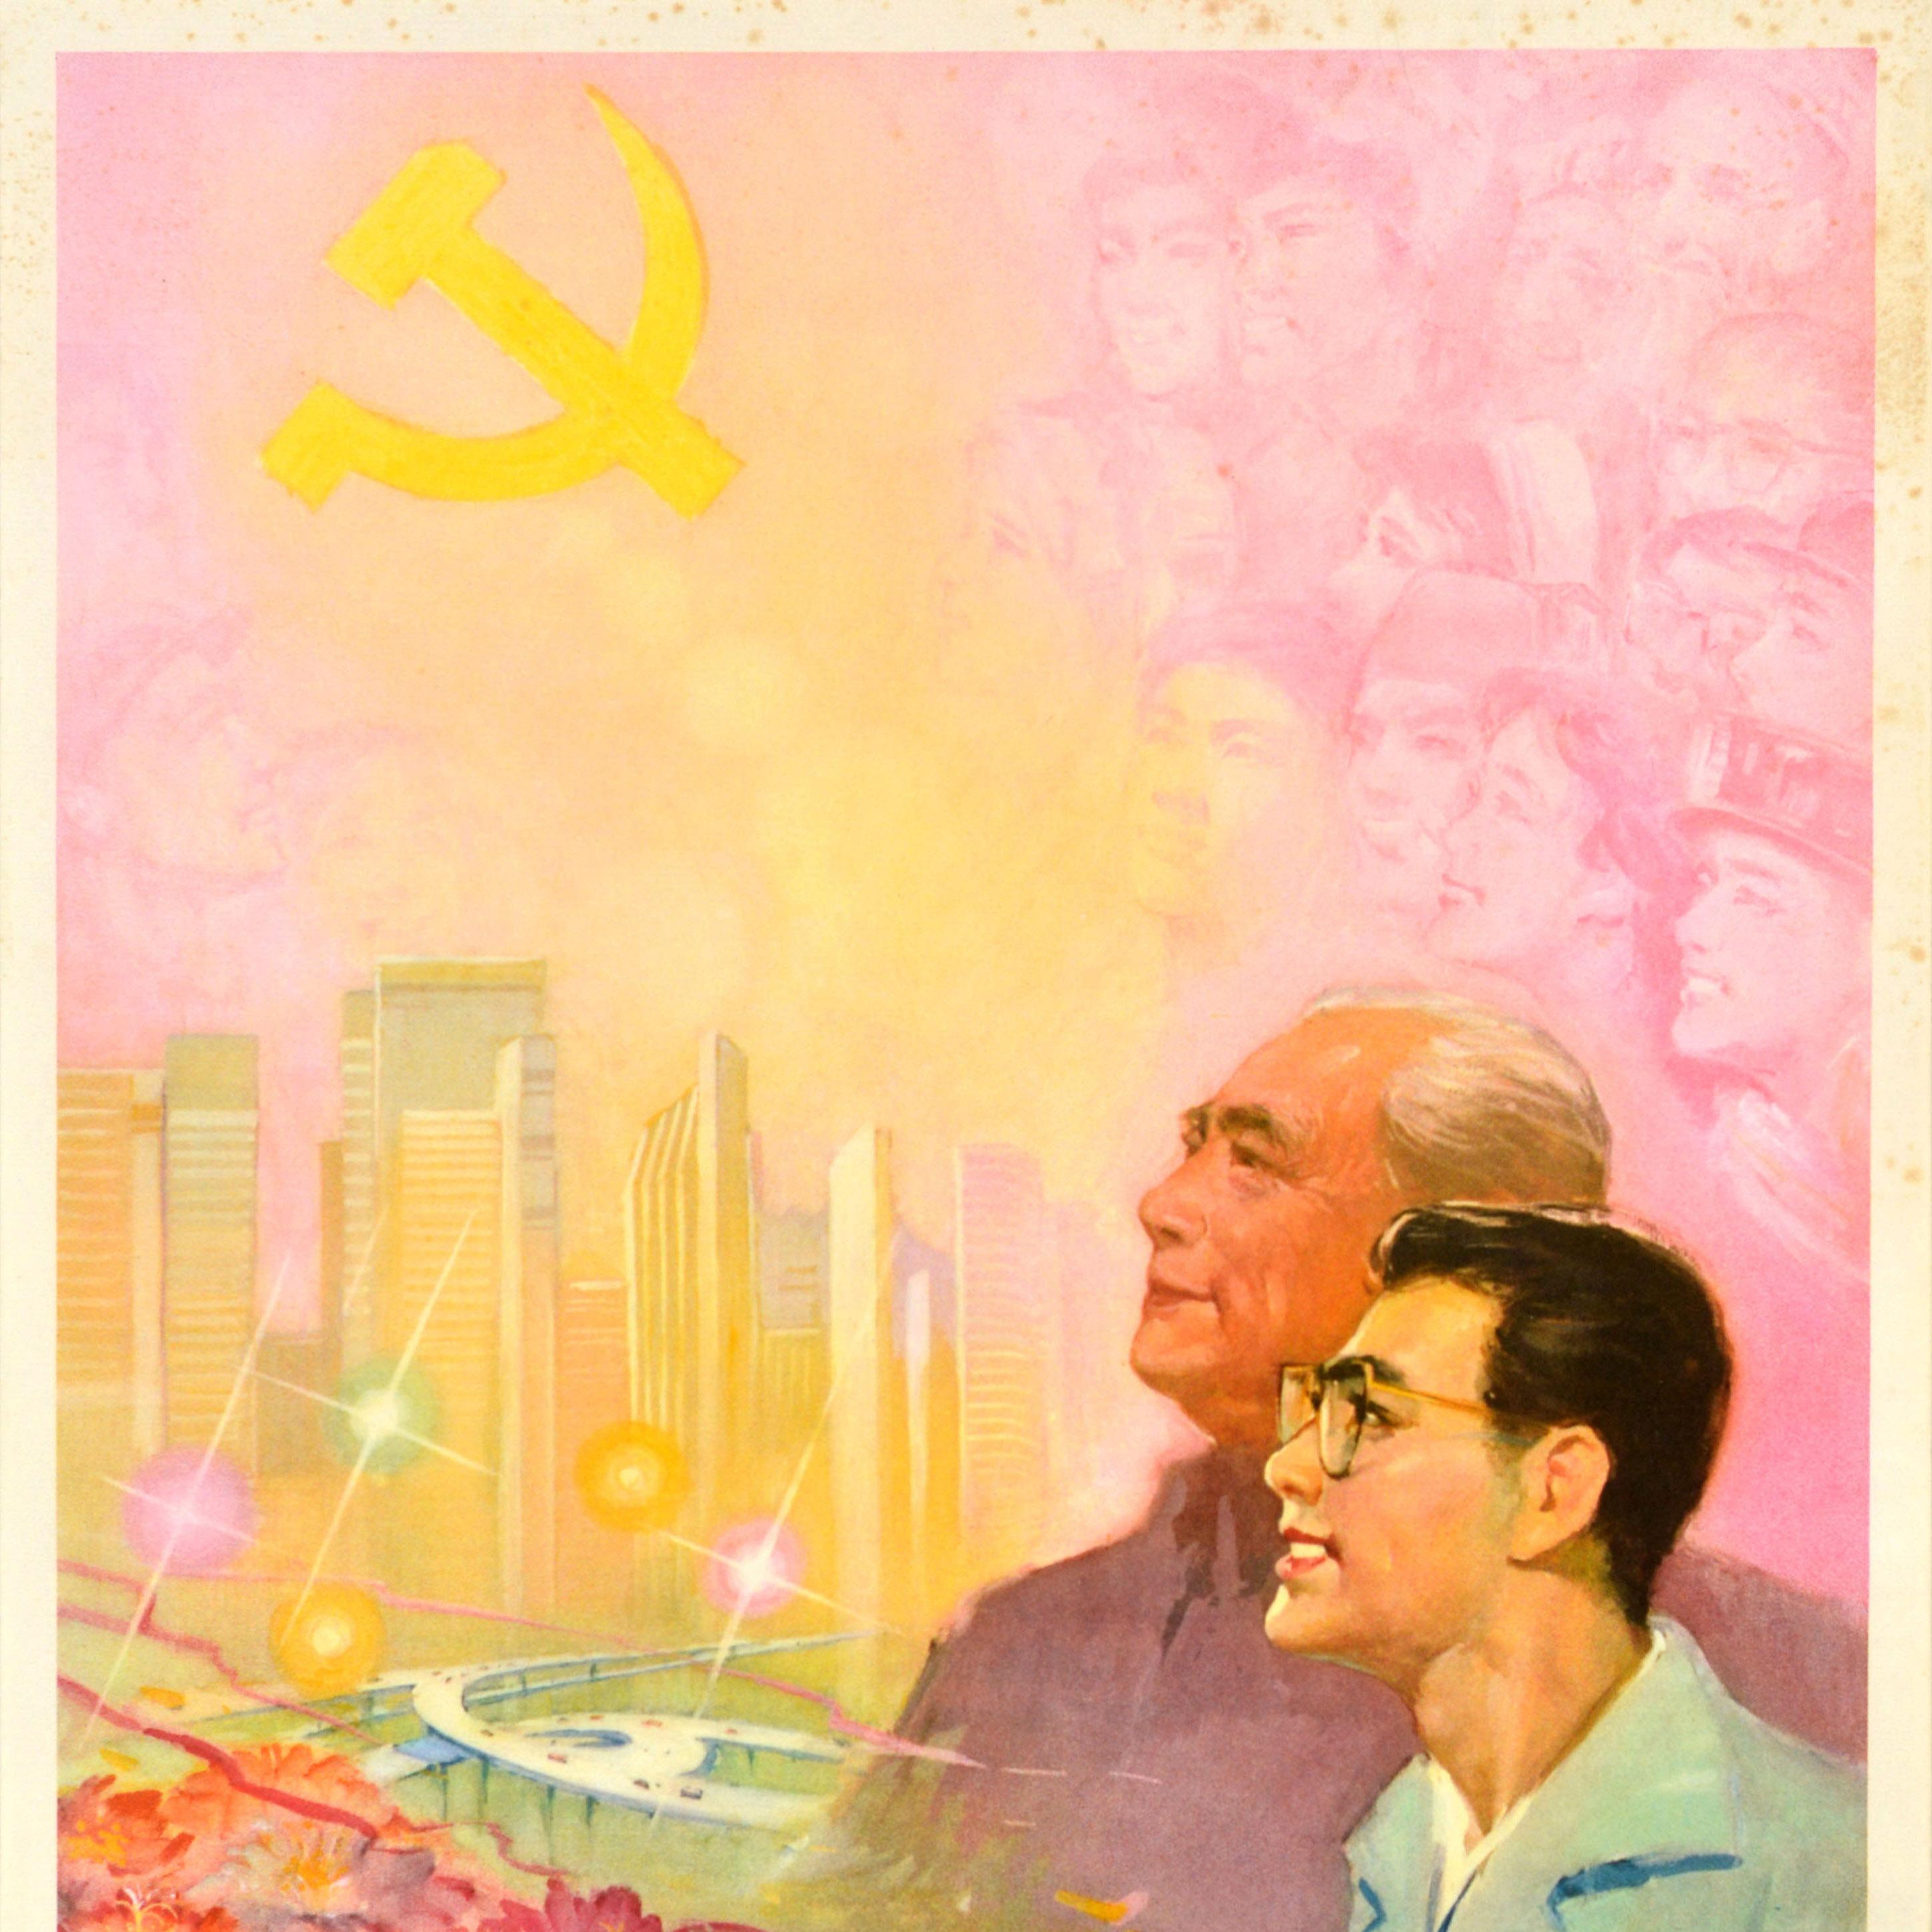 Original Vintage Chinese Communist Party Propaganda Poster Revitalise China In Good Condition For Sale In London, GB